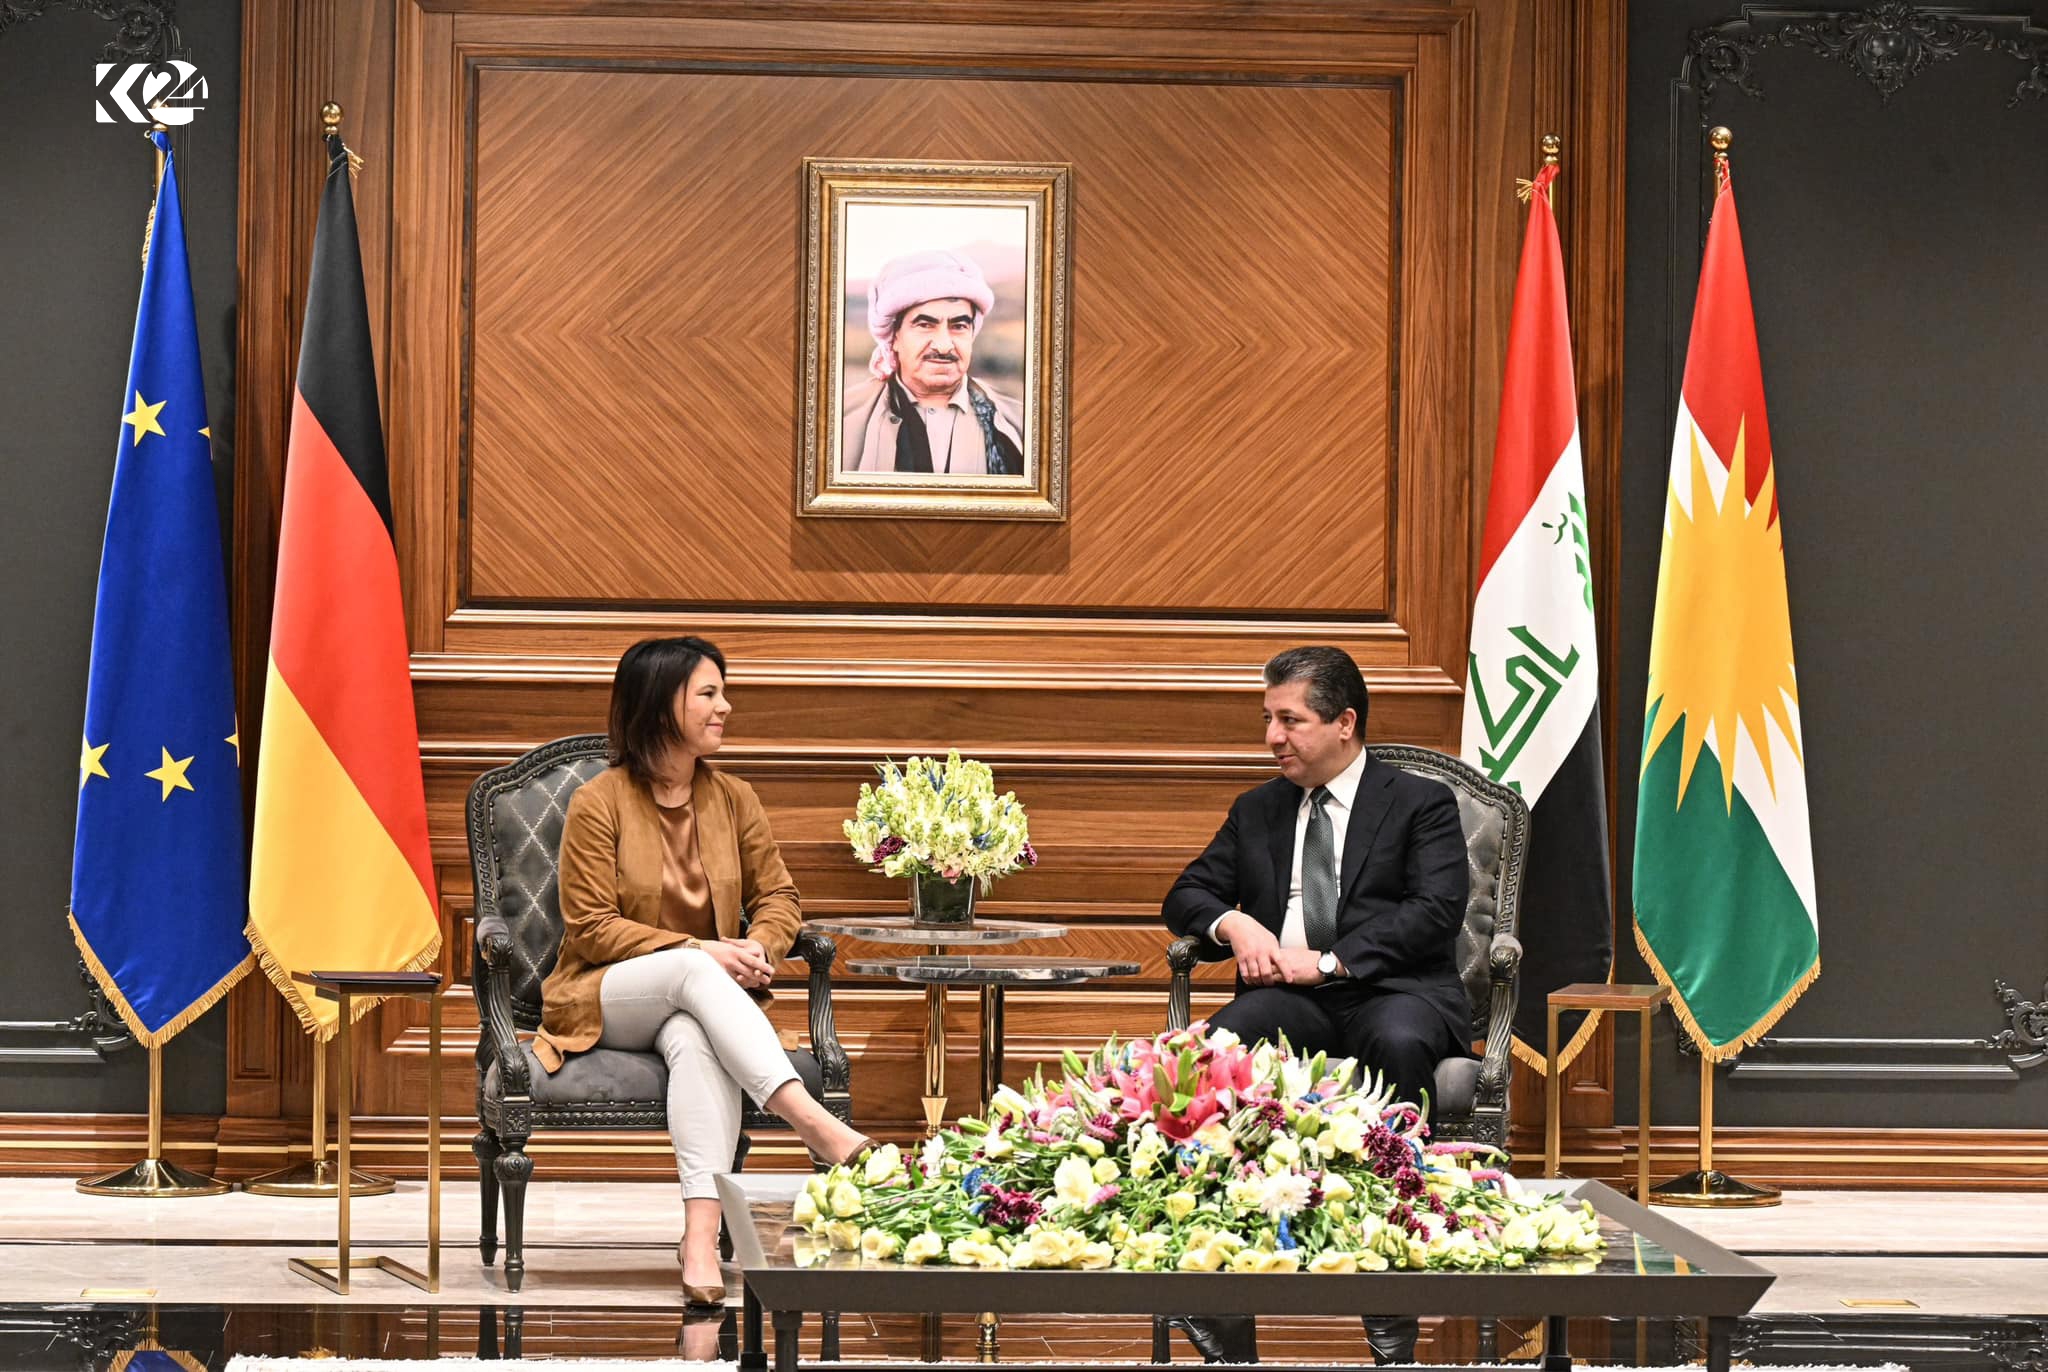 German Foreign Minister expresses gratitude for Kurdistan Region's hospitality and support for human rights